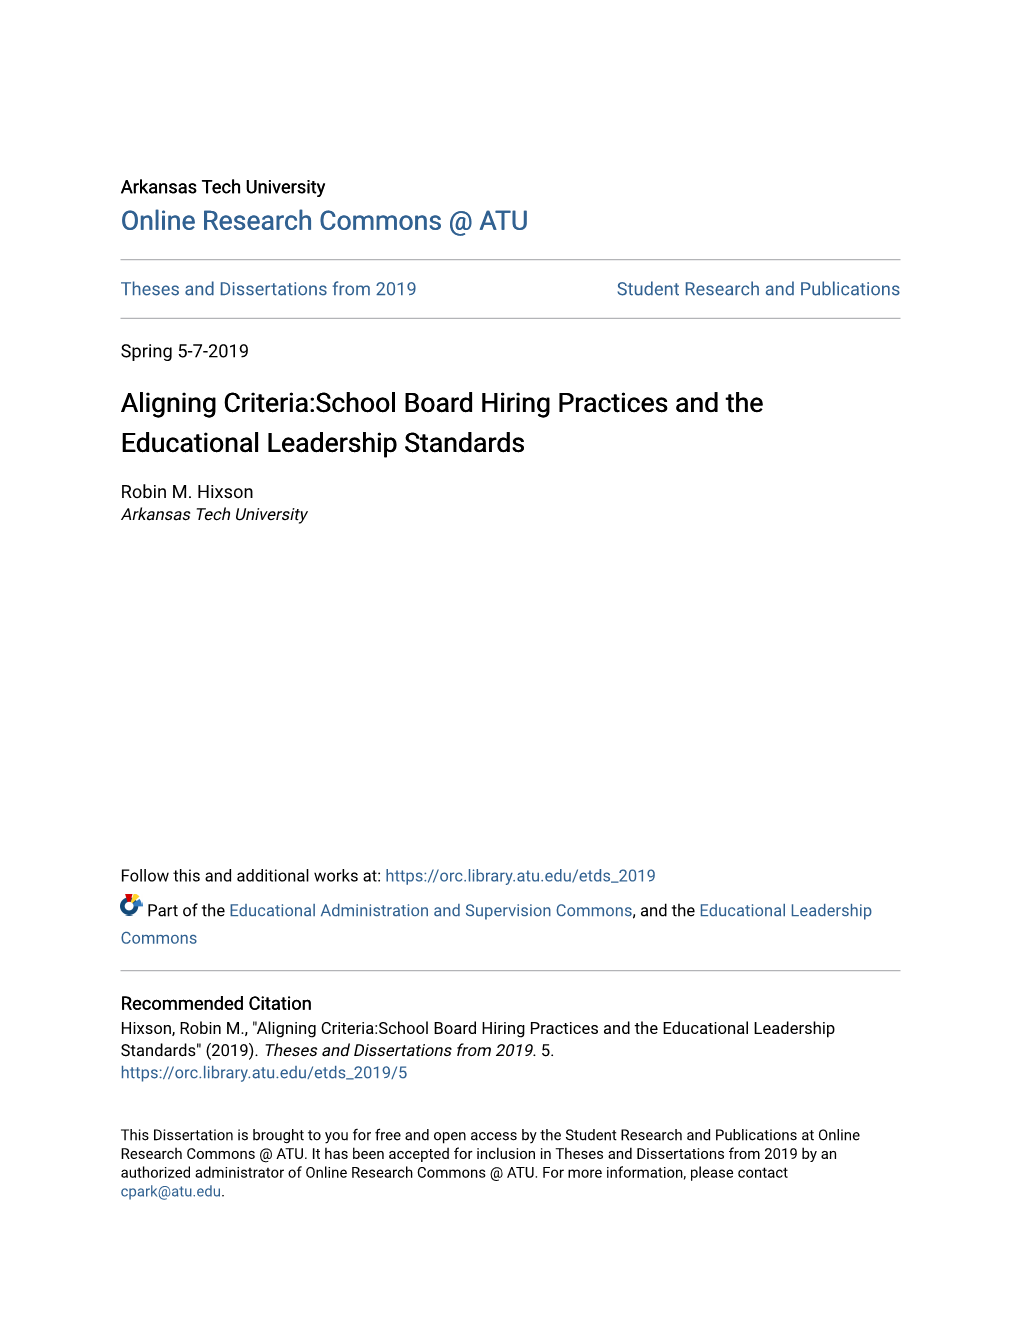 Aligning Criteria:School Board Hiring Practices and the Educational Leadership Standards